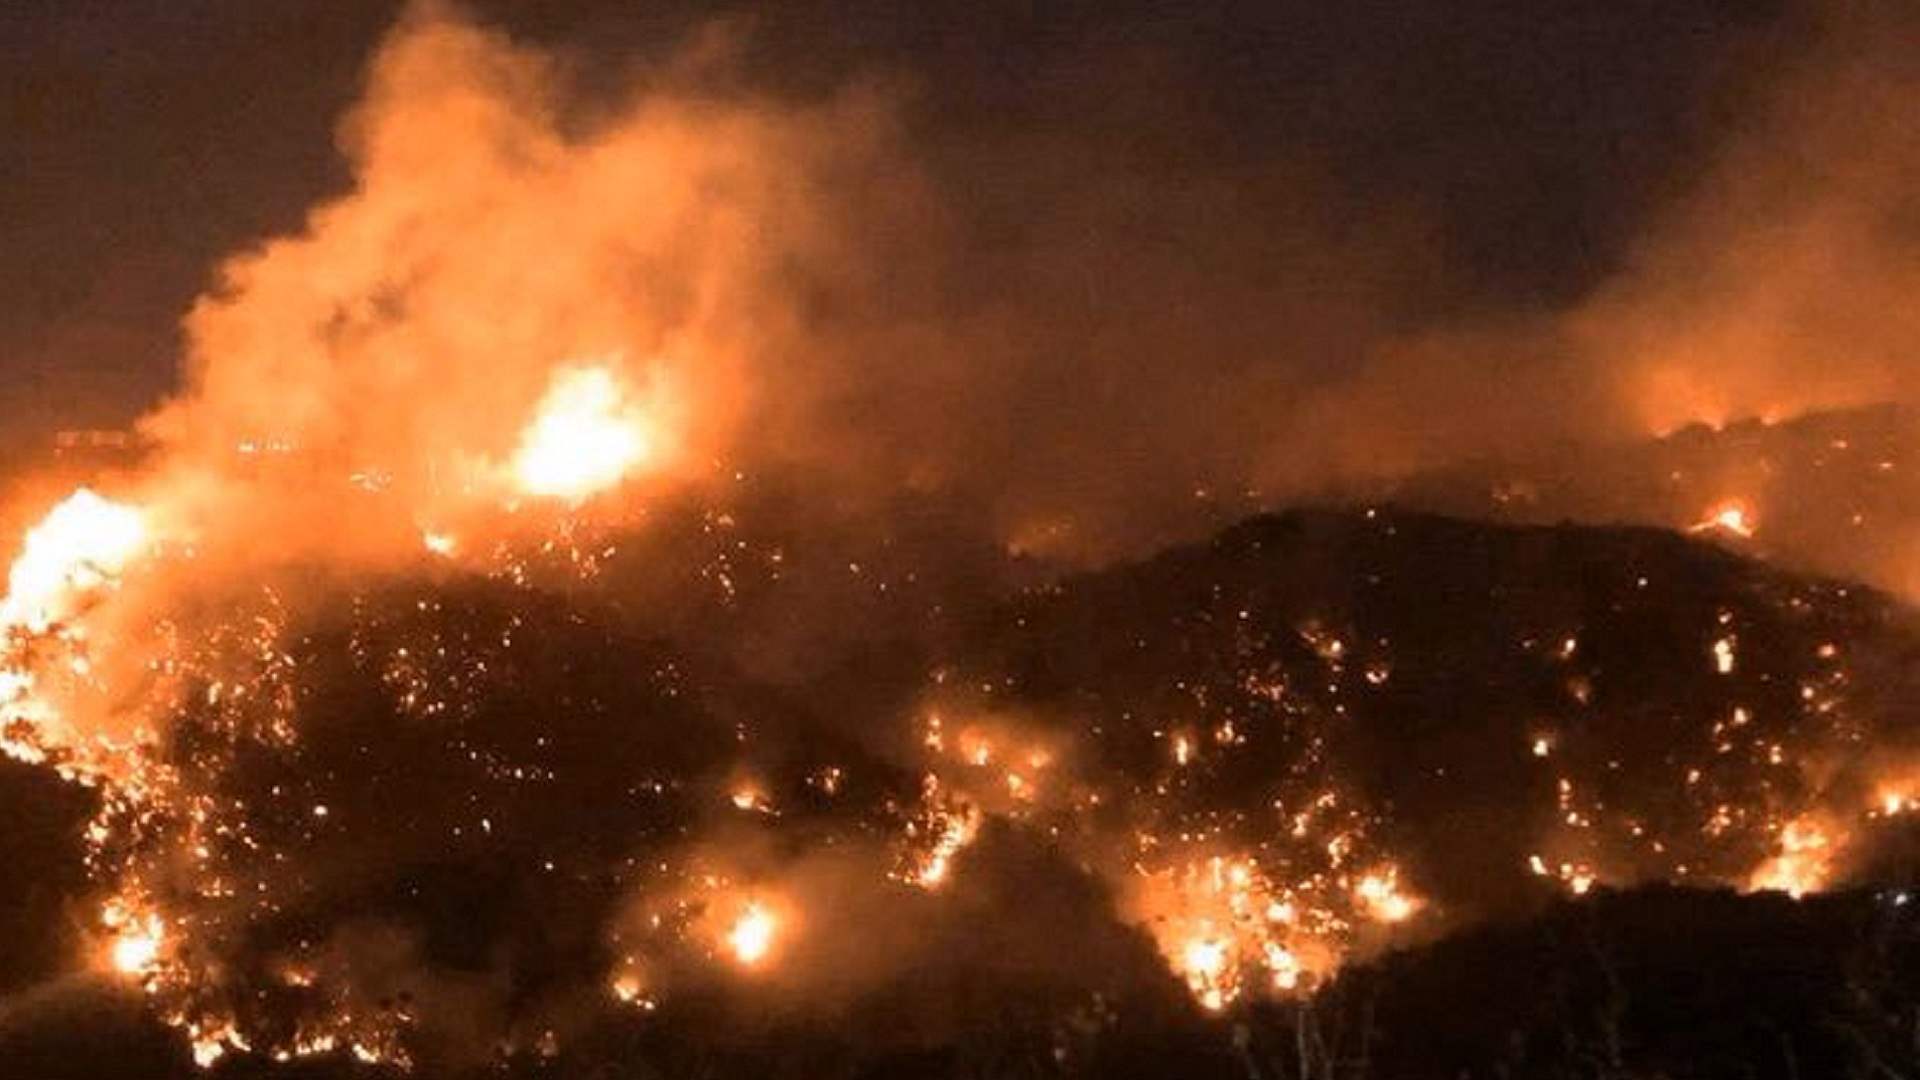 Lebanon faces rising frequency of forest fires: report 